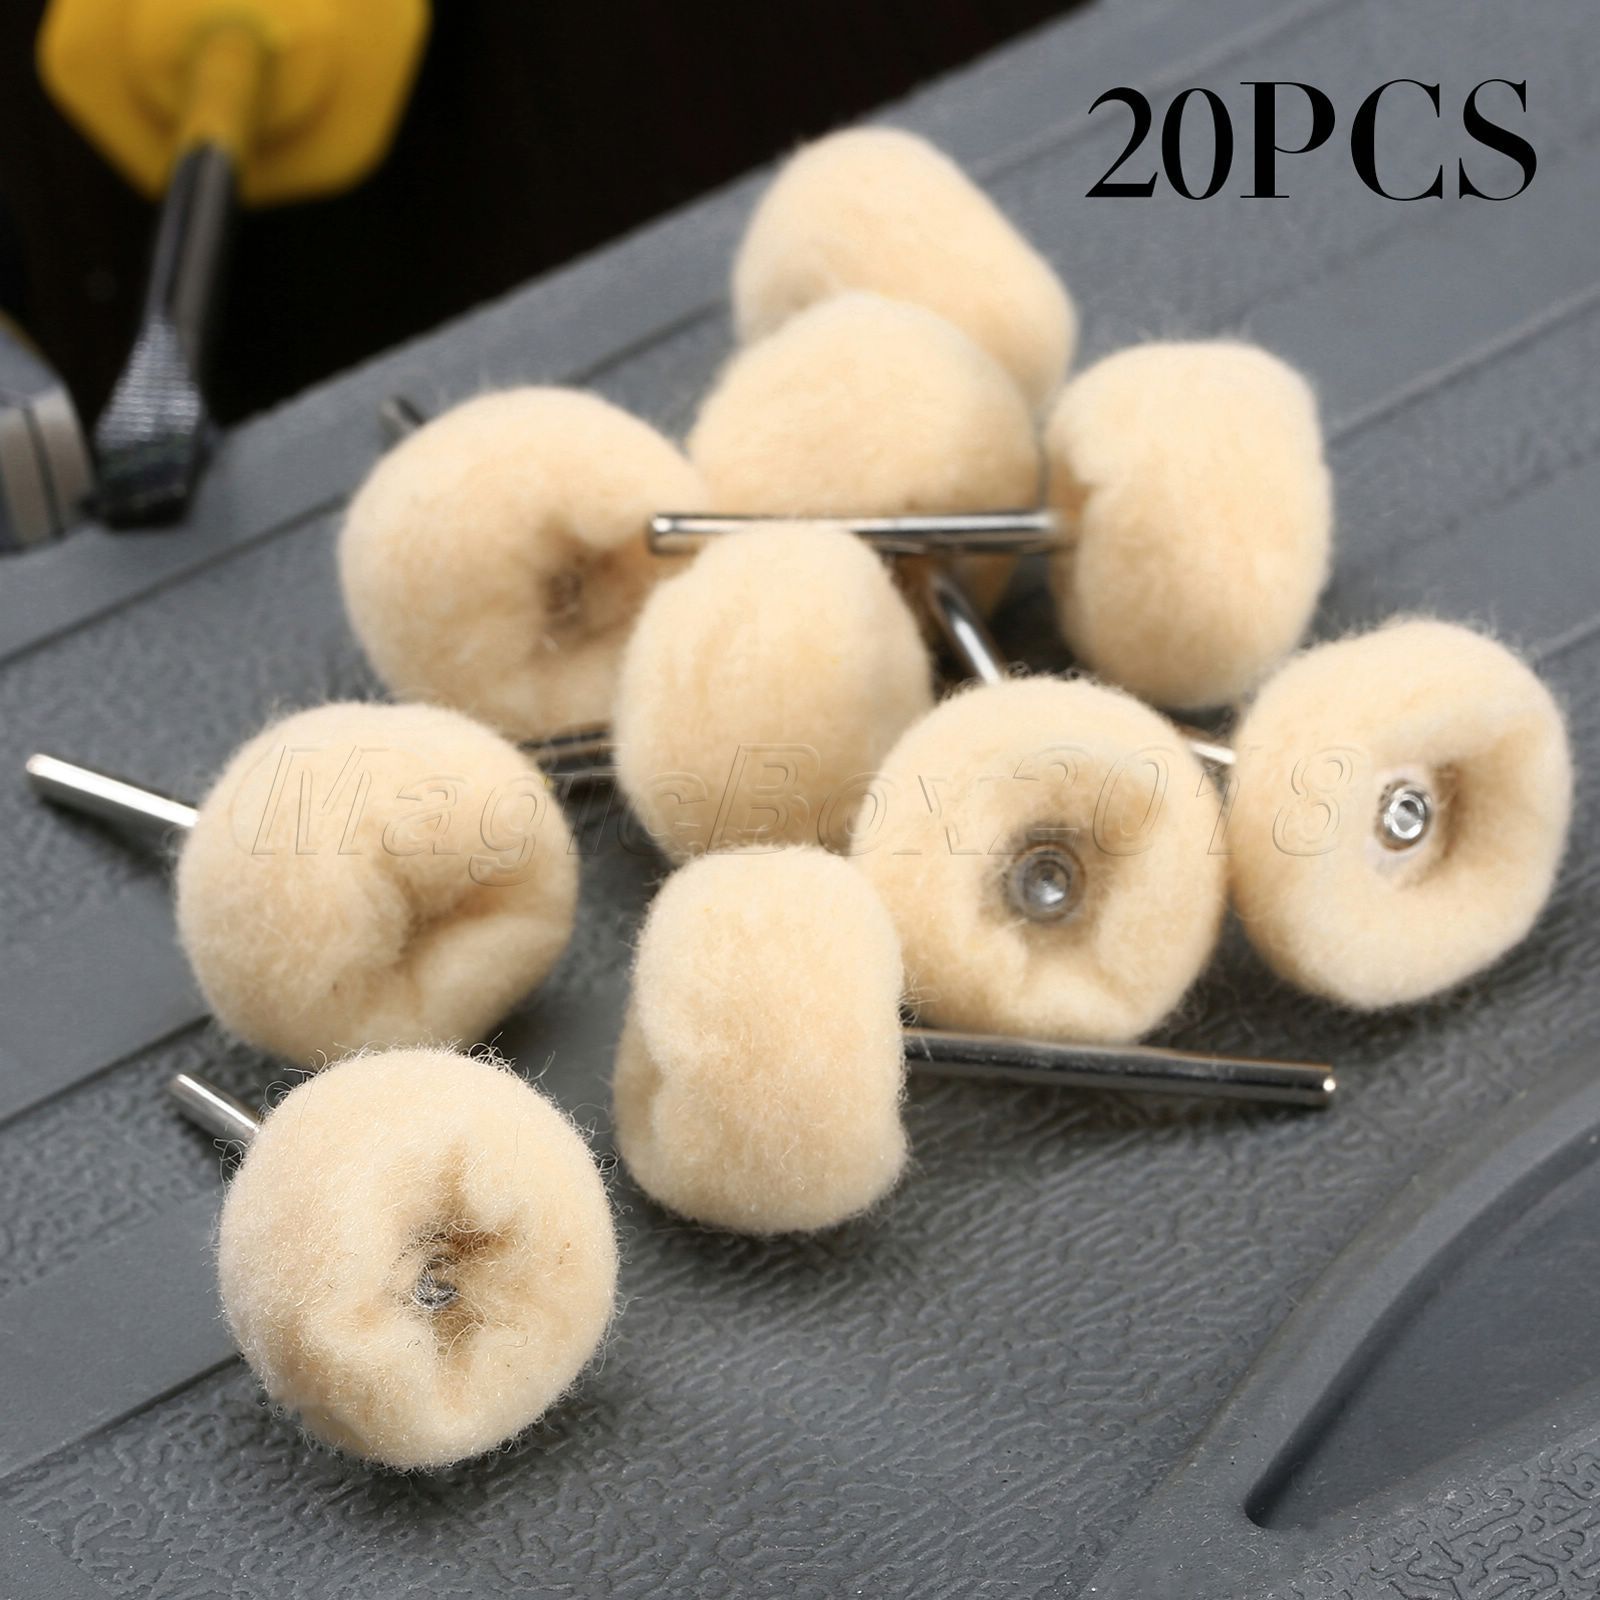 20pcs 25mm Wool Felt Polishing Buffing Round Wheel Tool with Shank For Grinder